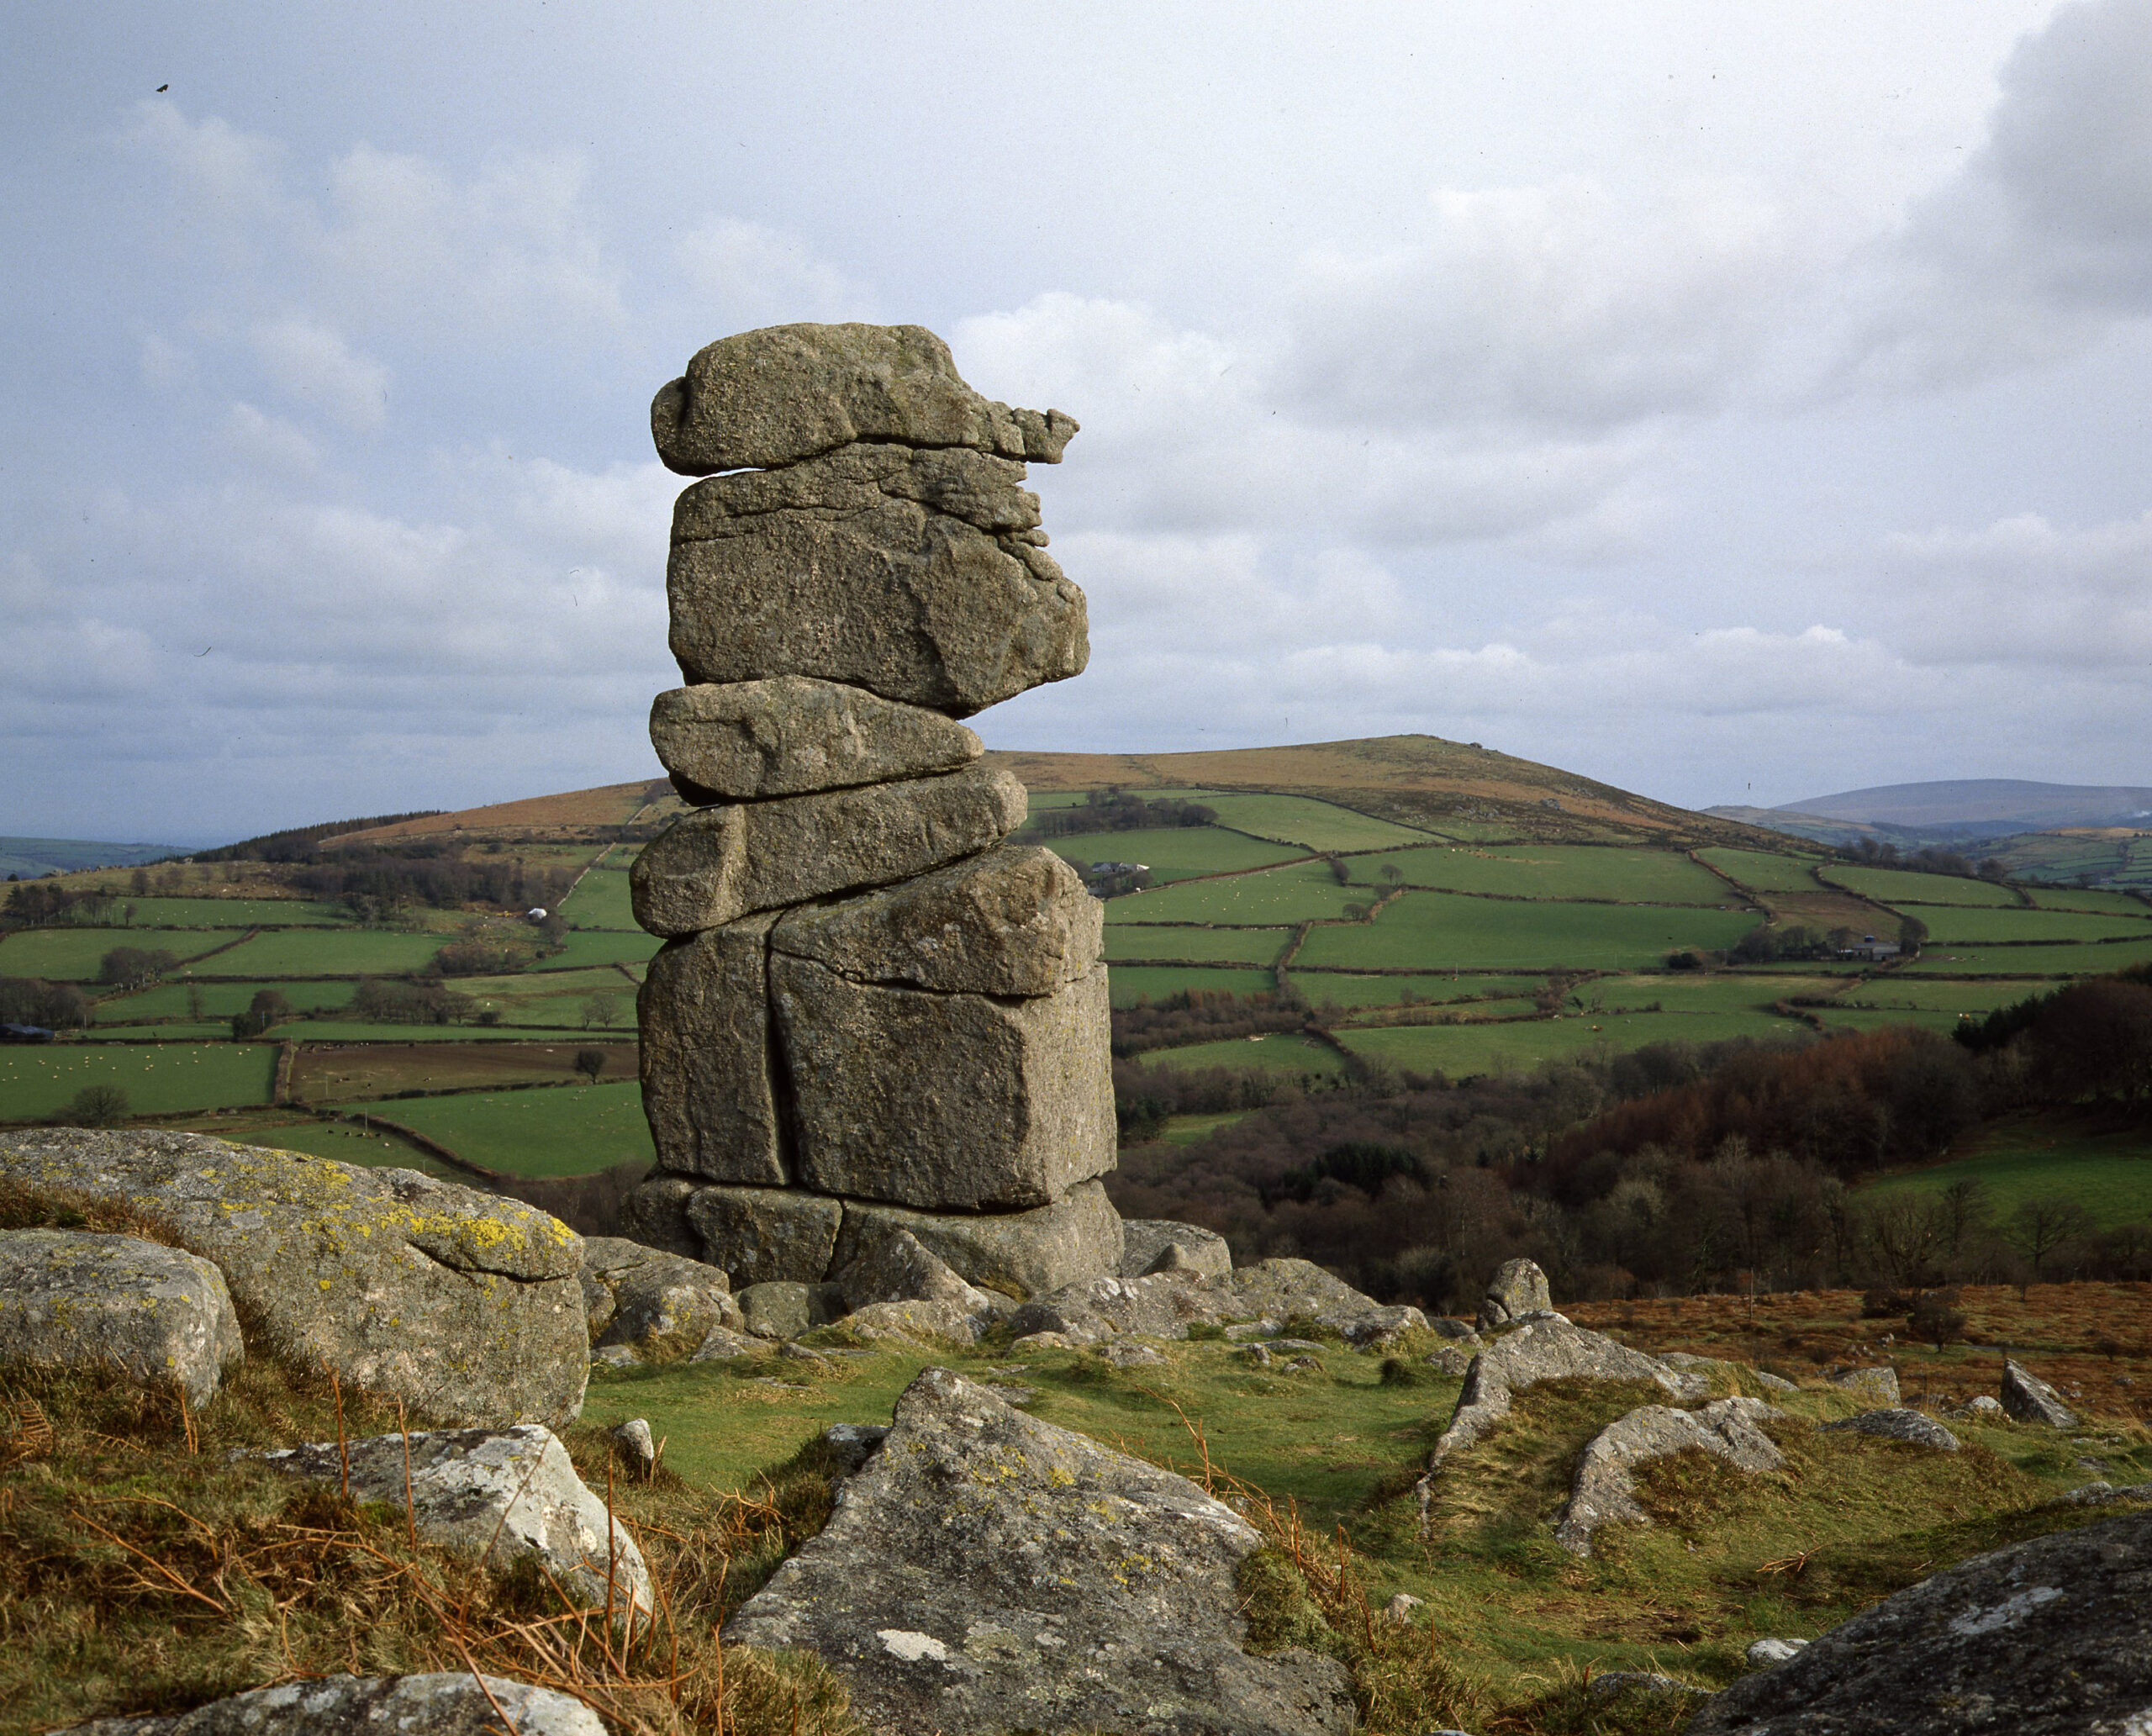 An ancient rocky formation that looks like a body and a head, known as Bowerman's Nose stands proud just off centre left of a photo of the Manaton landscape. Fields can be seen in the distance and the sky is cloudy.